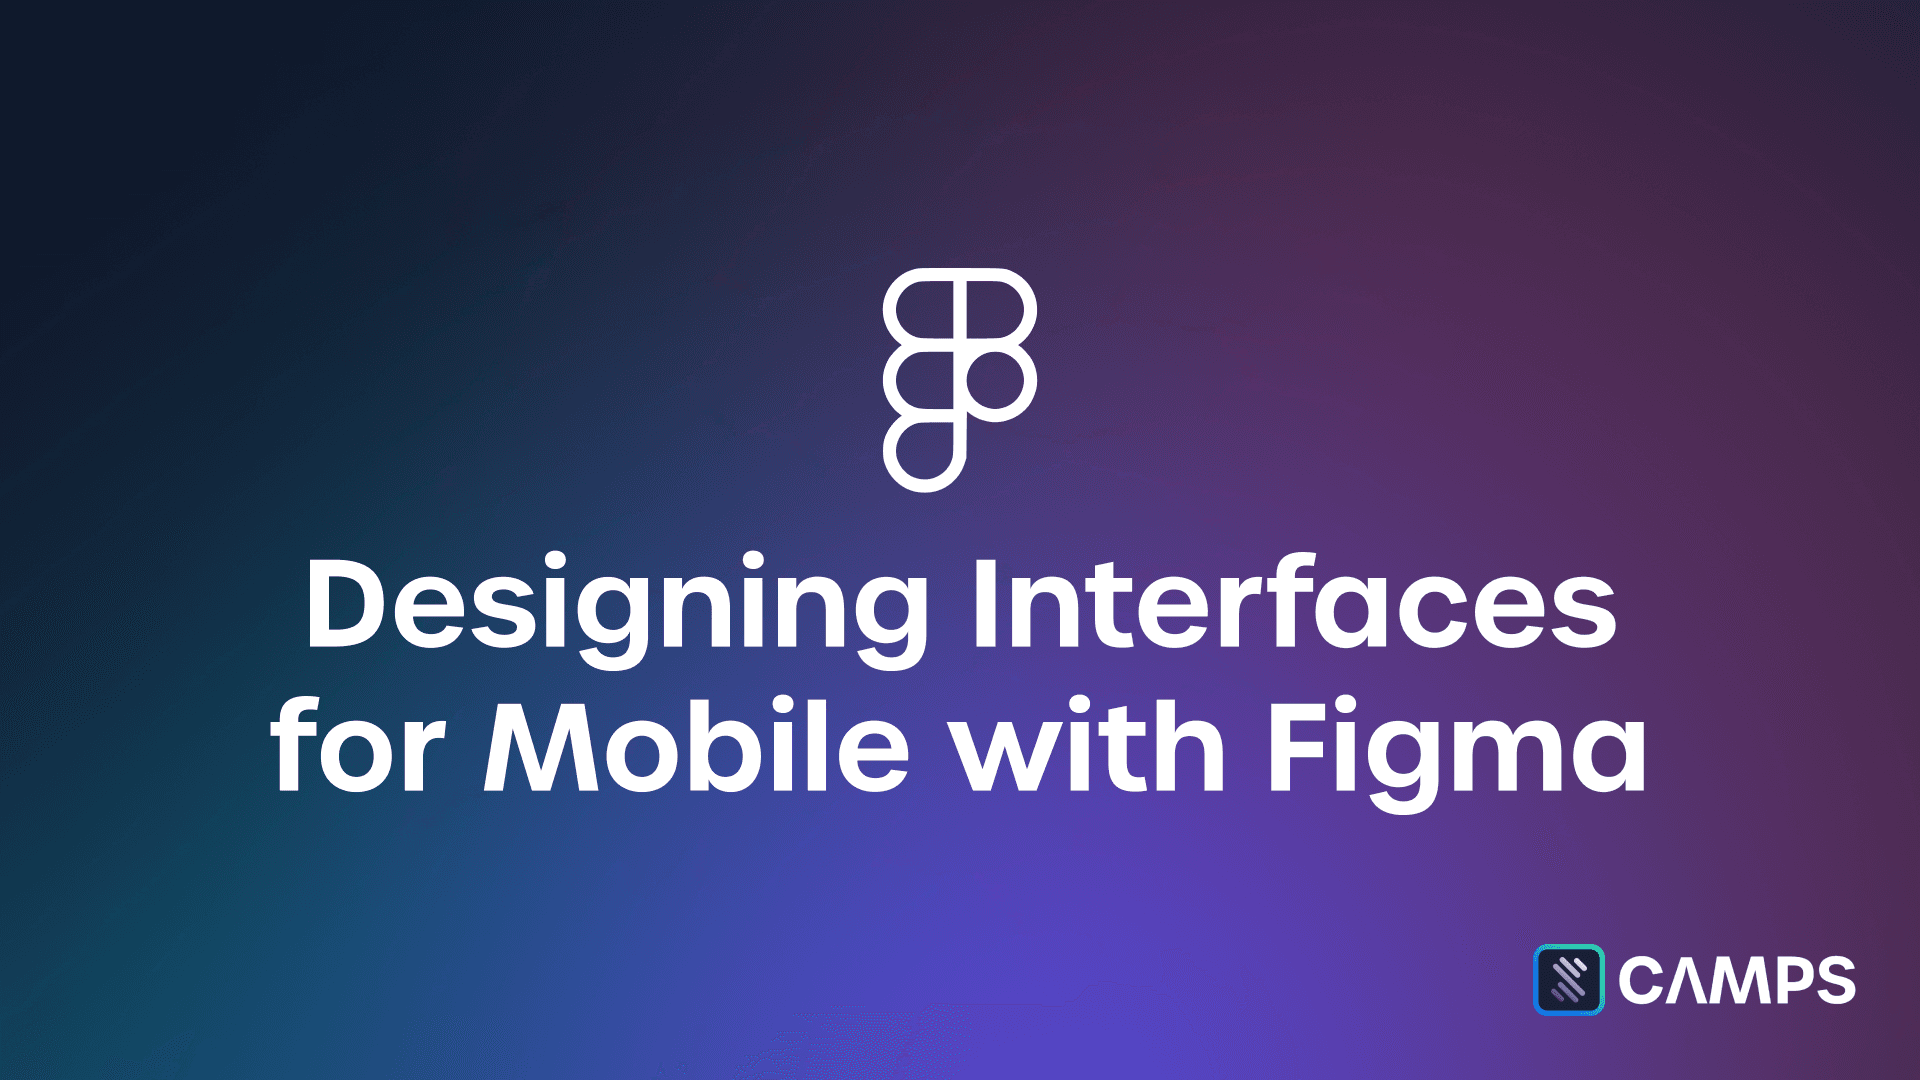 Designing Interfaces for Mobile with Figma